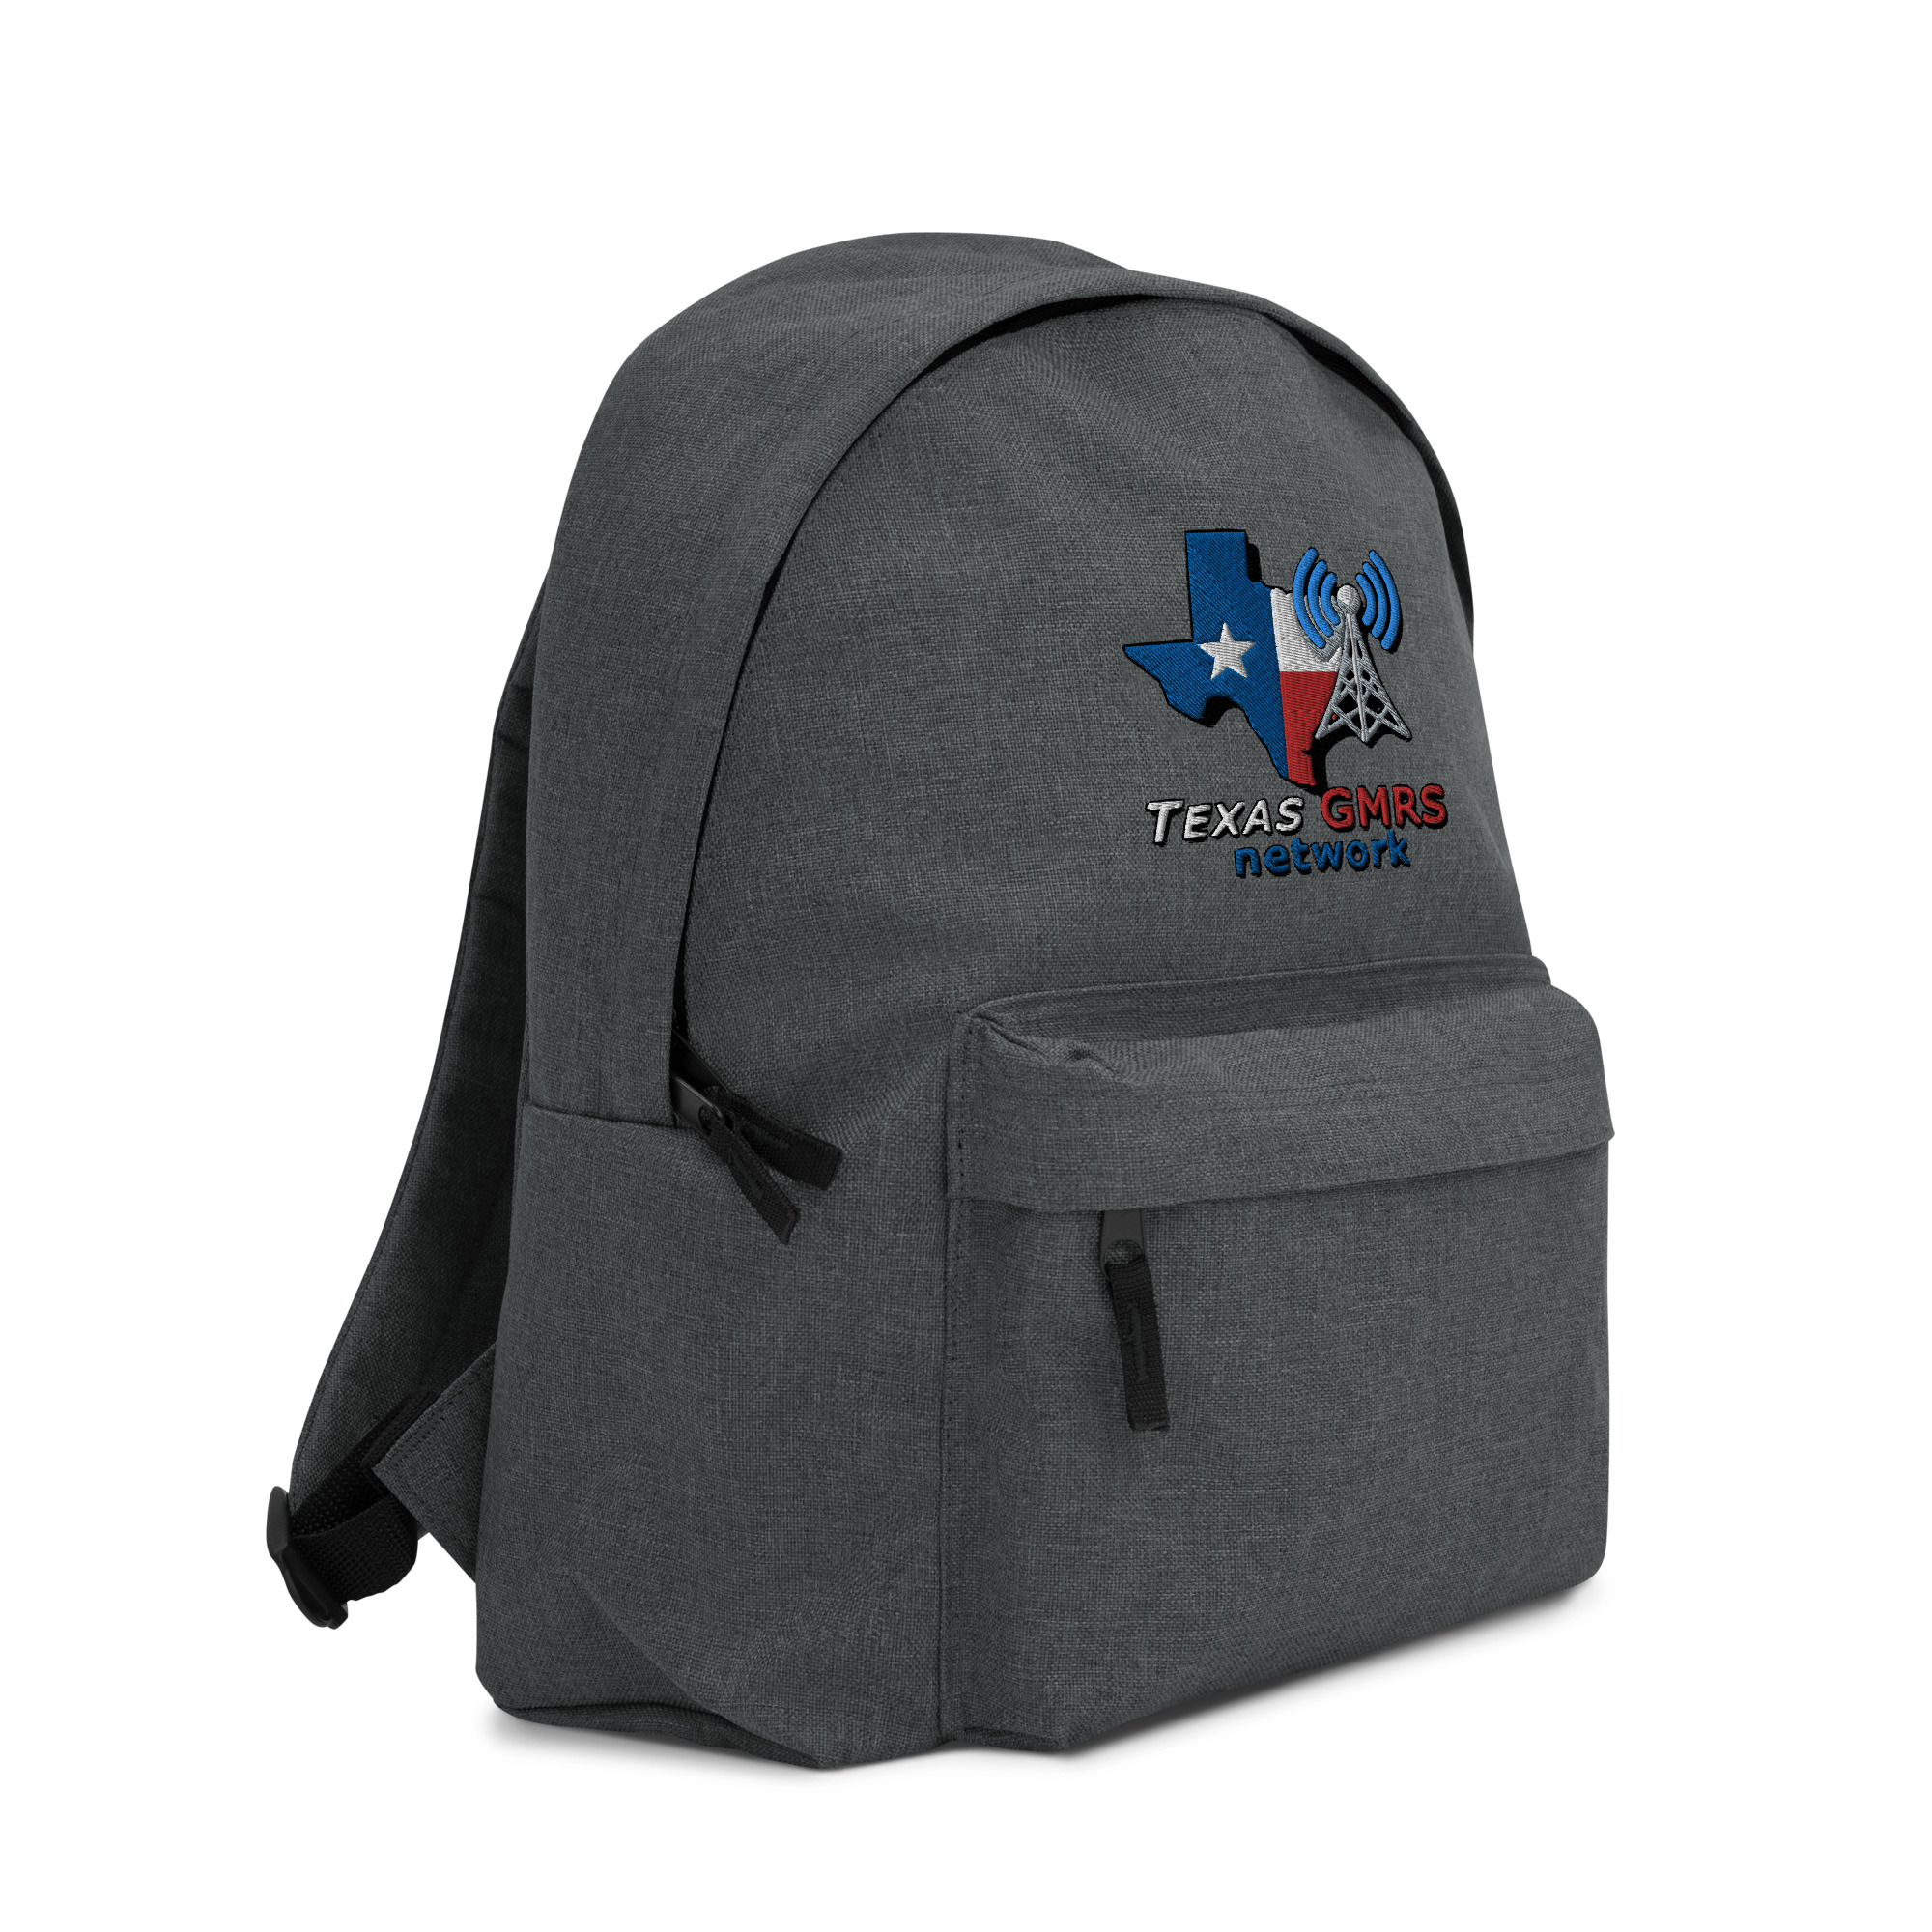 Embroidered Backpack – Texas GMRS Network